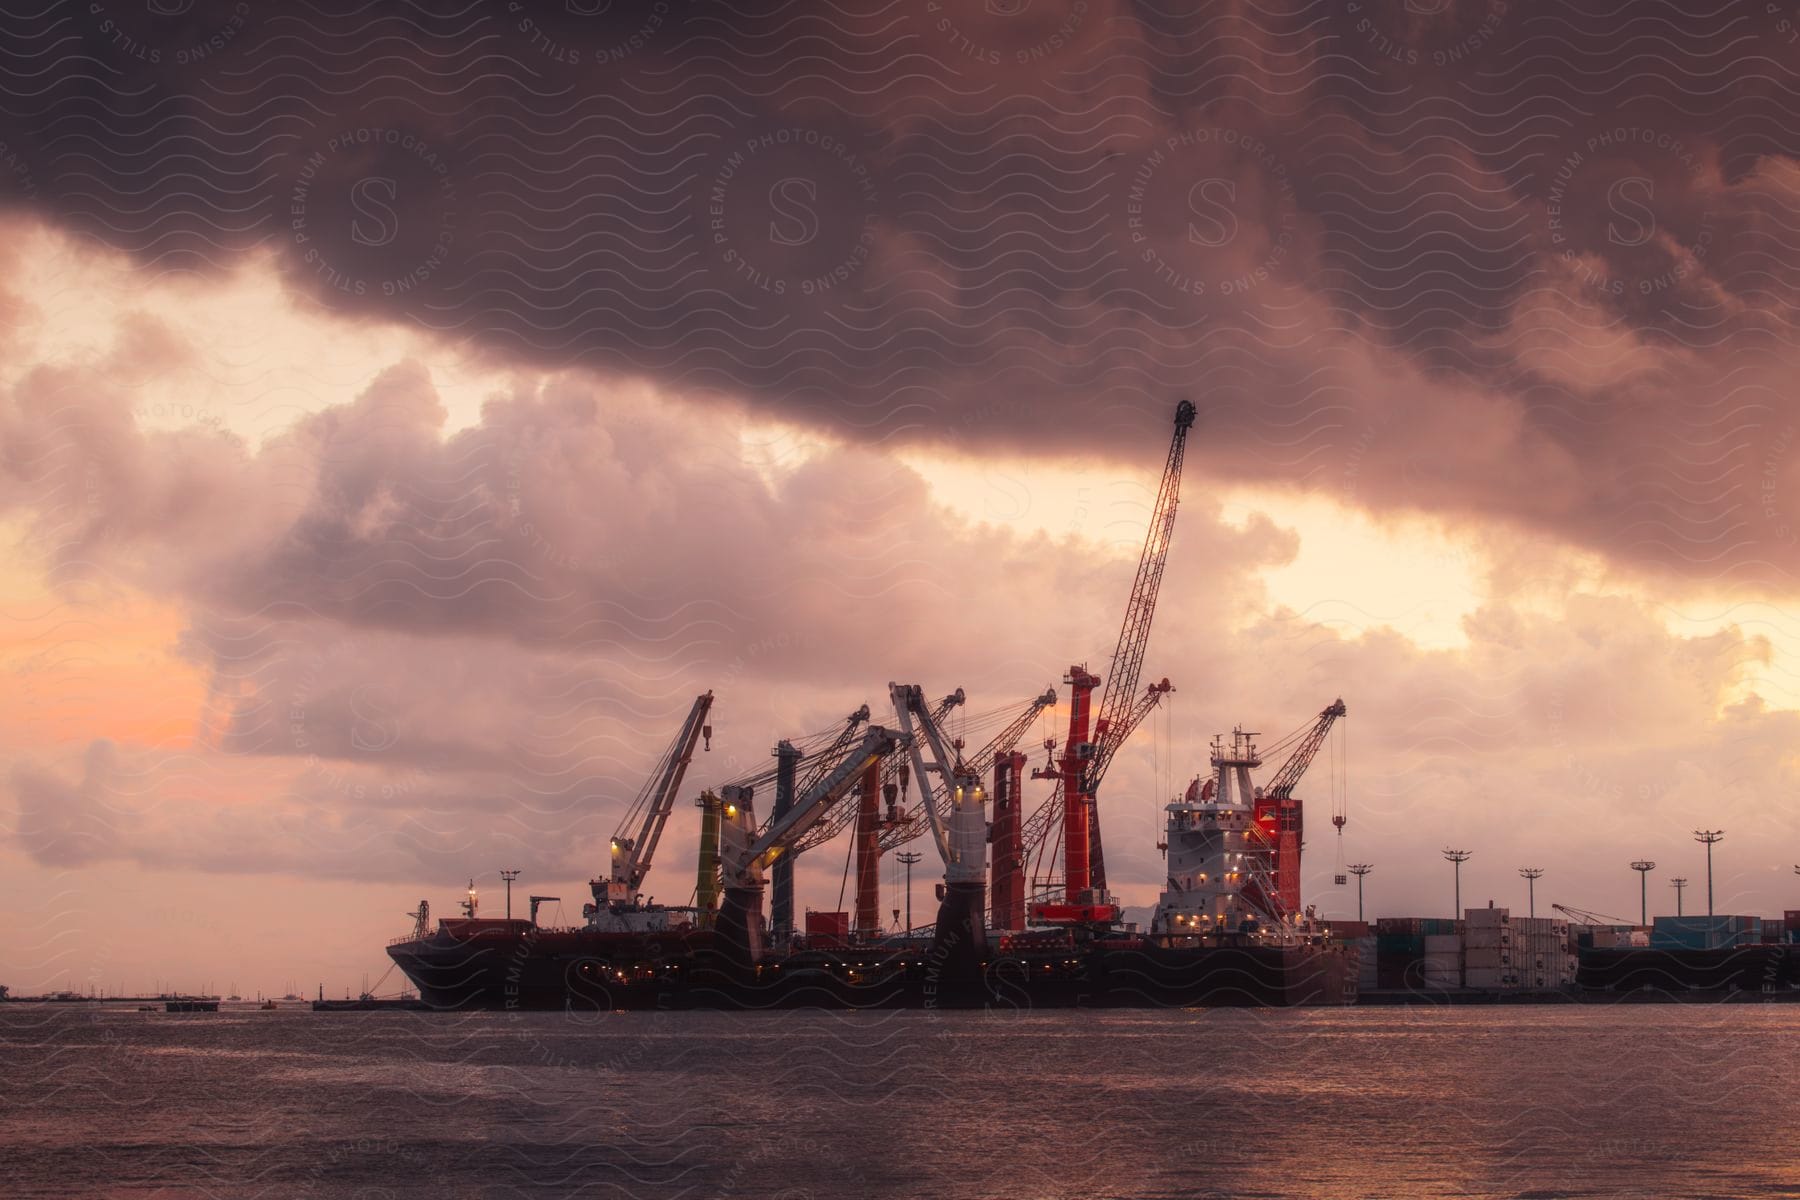 Cargo ship on the water next to a port under a sky with heavy clouds